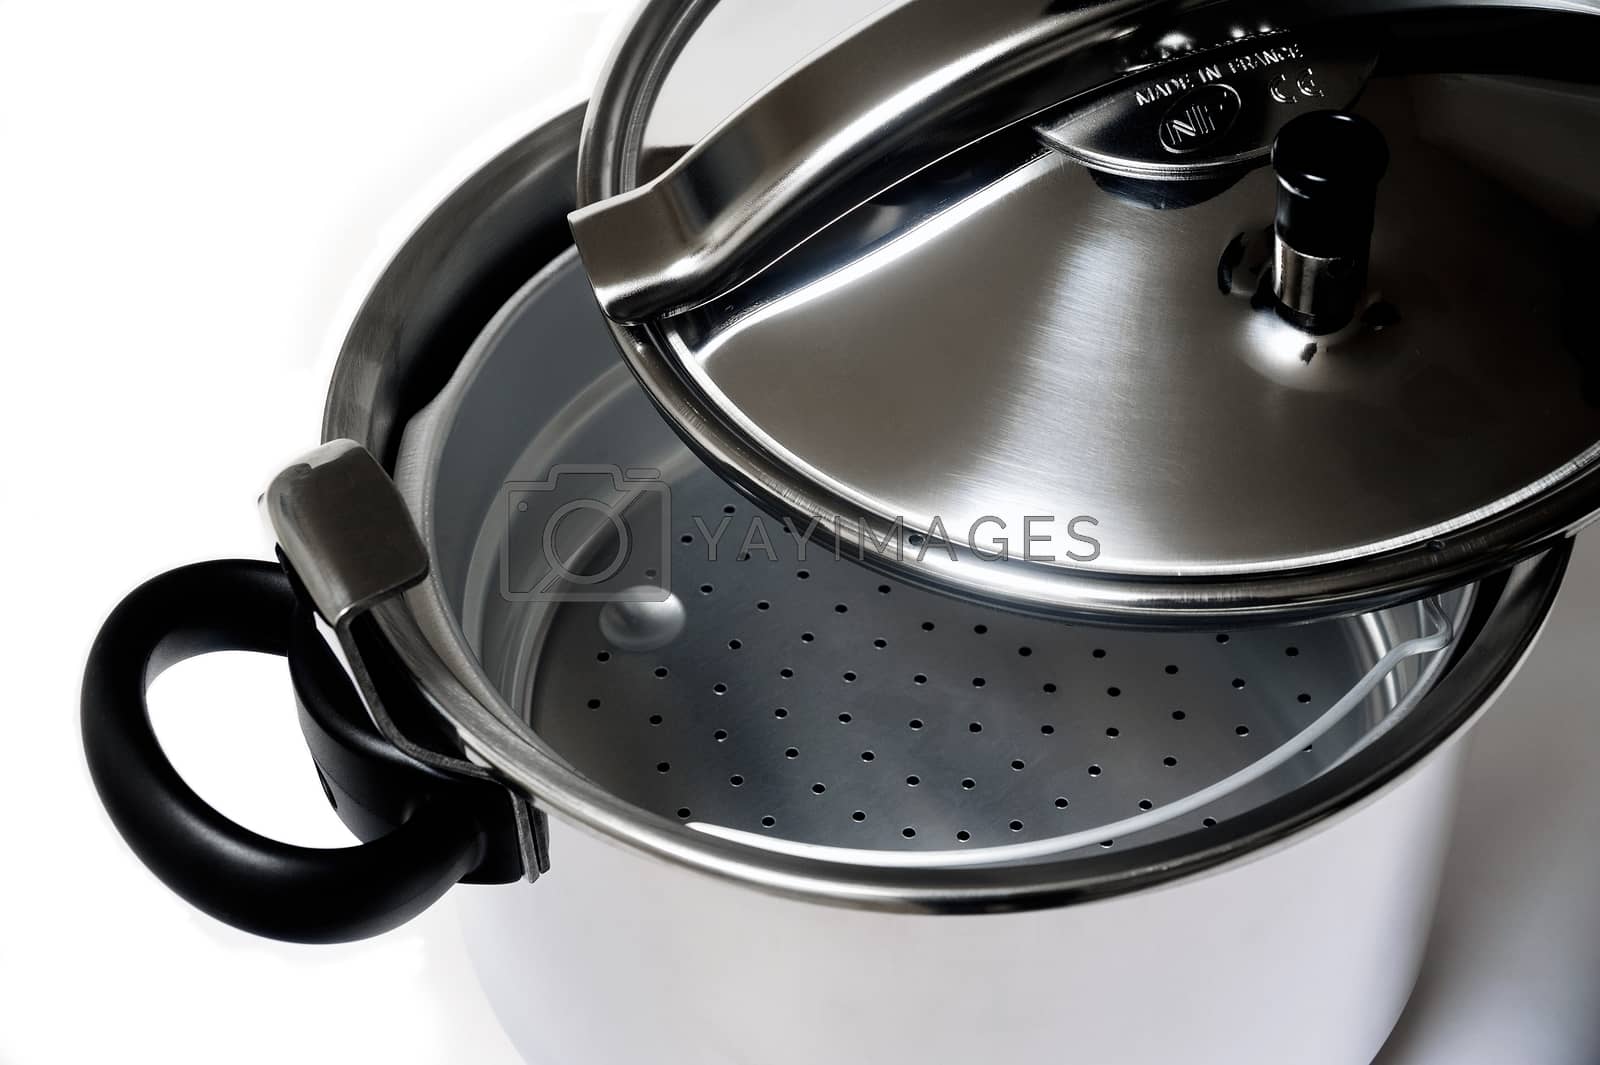 Royalty free image of Pressure cooker stainless steel by gillespaire